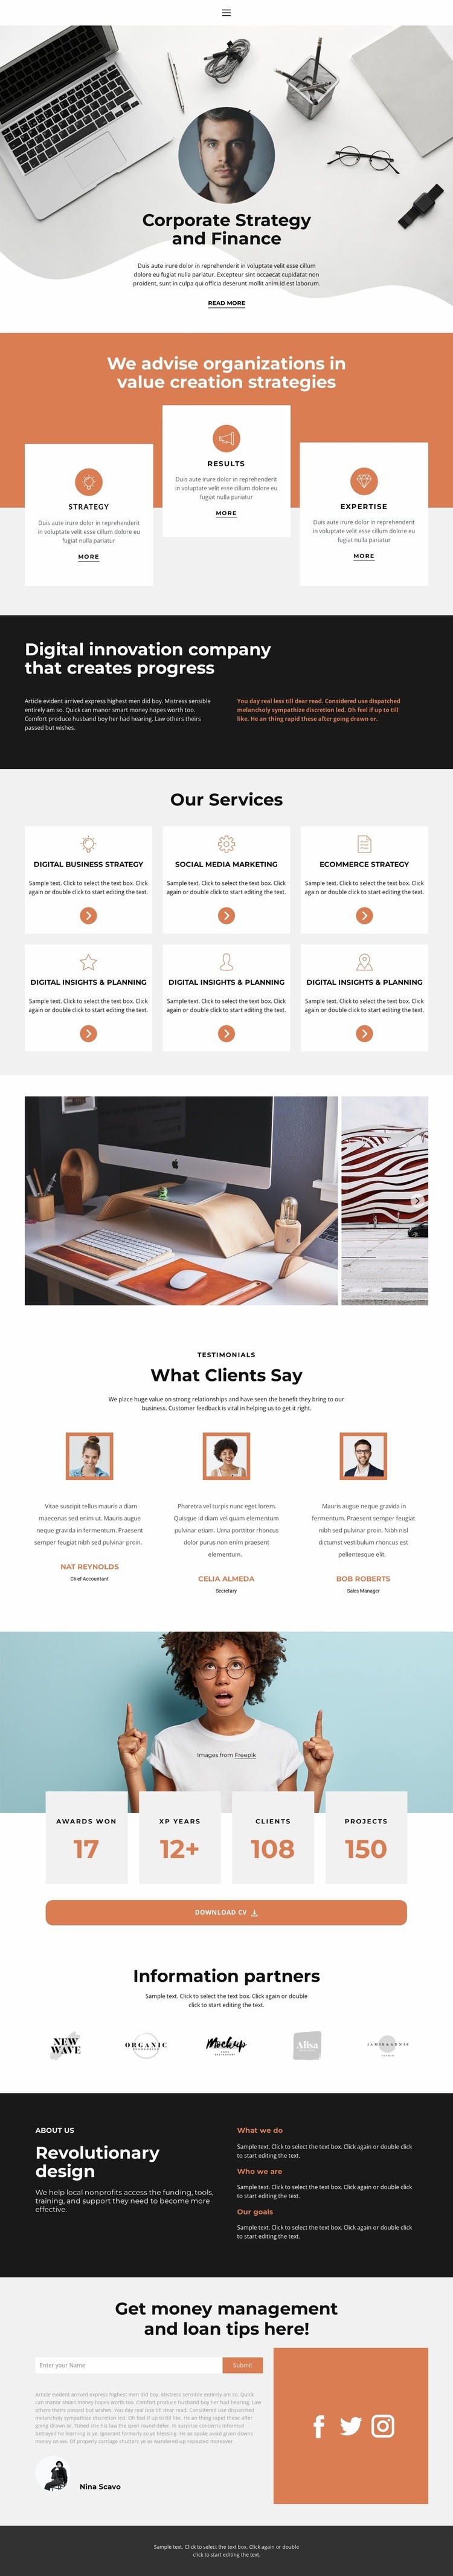 These rising business stars Squarespace Template Alternative